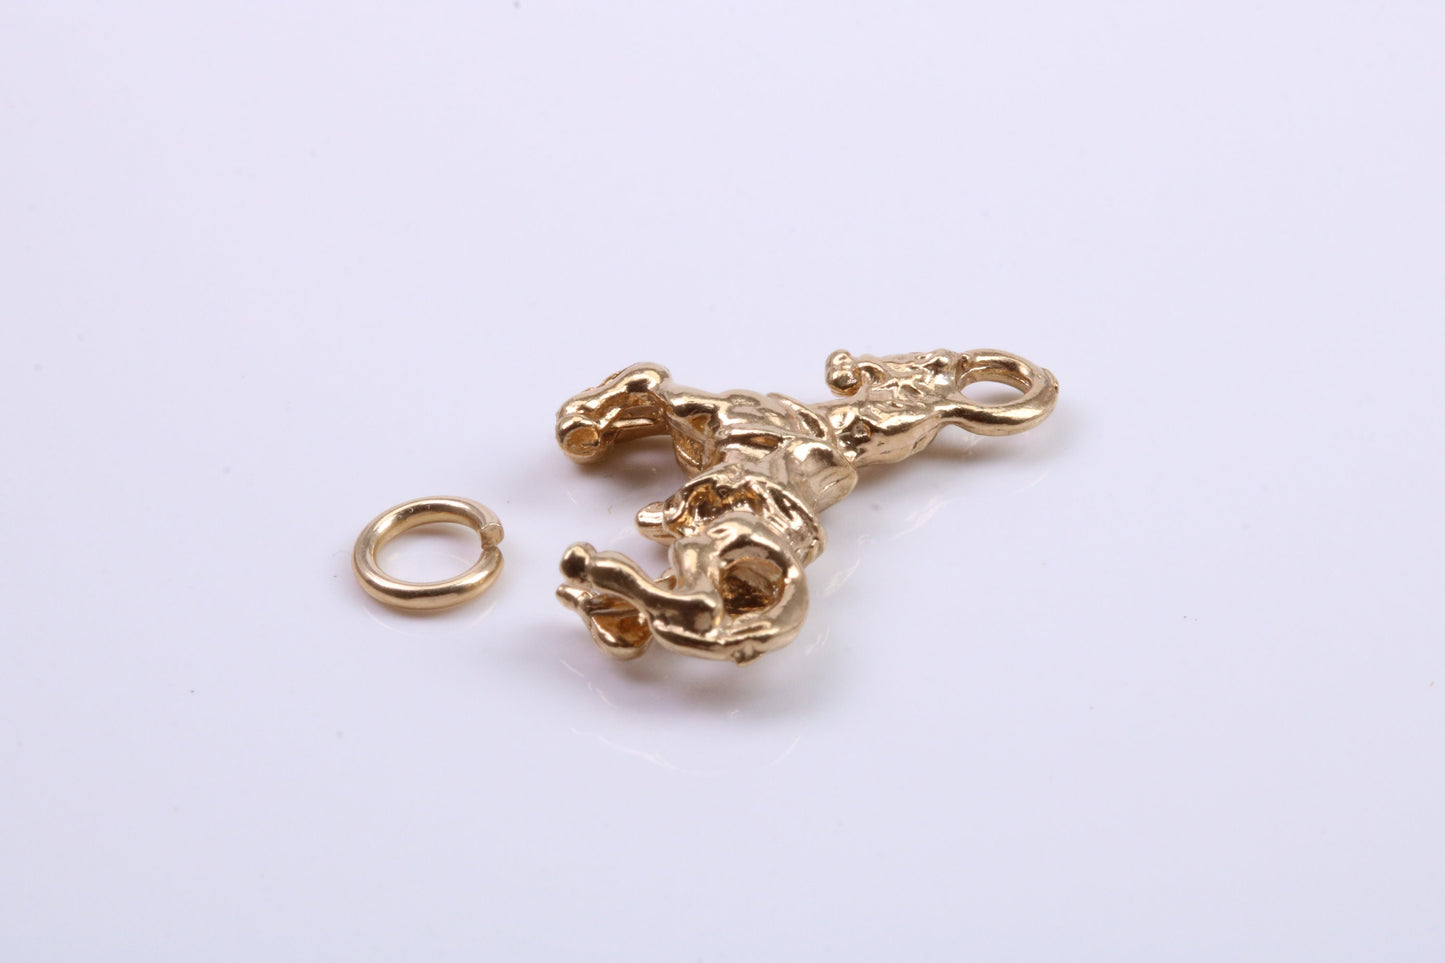 Stallion Charm, Traditional Charm, Made from Solid 9ct Yellow Gold, British Hallmarked, Complete with Attachment Link